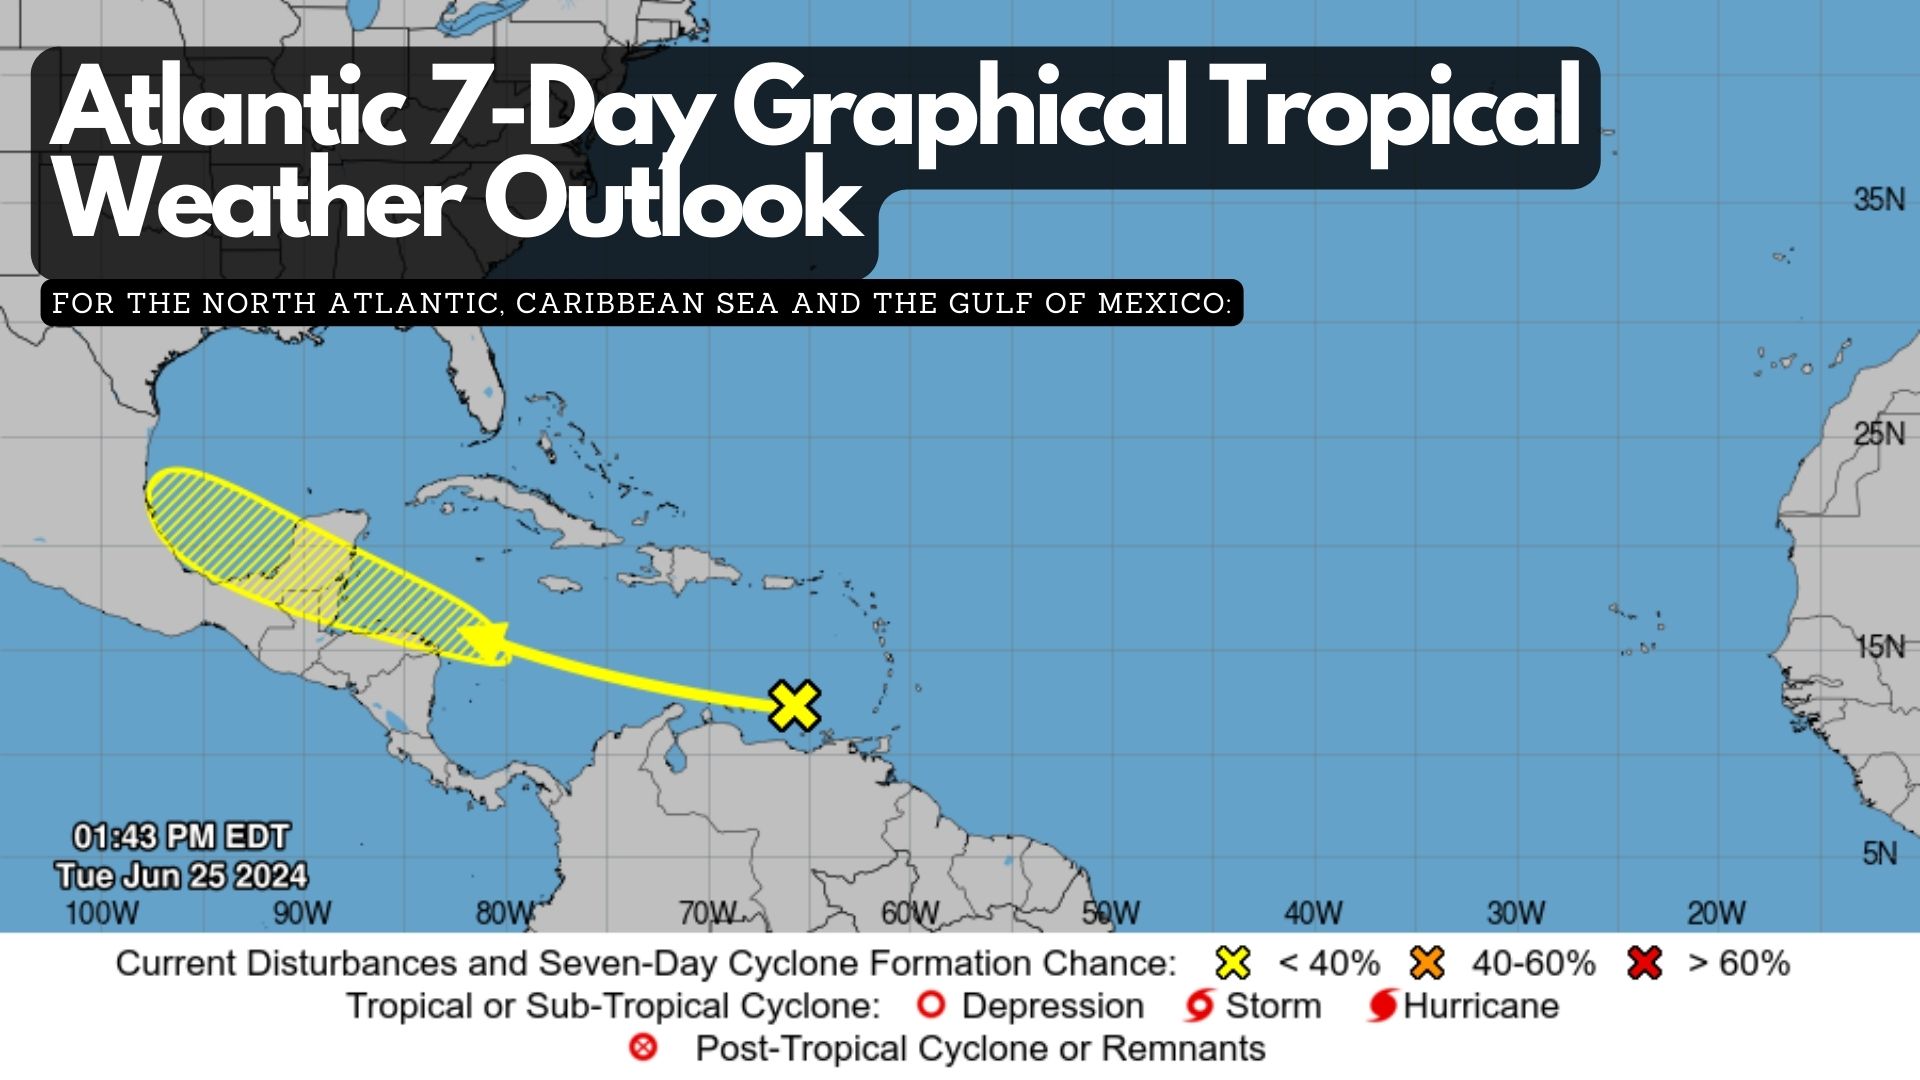 Atlantic 7-Day Graphical Tropical Weather Outlook